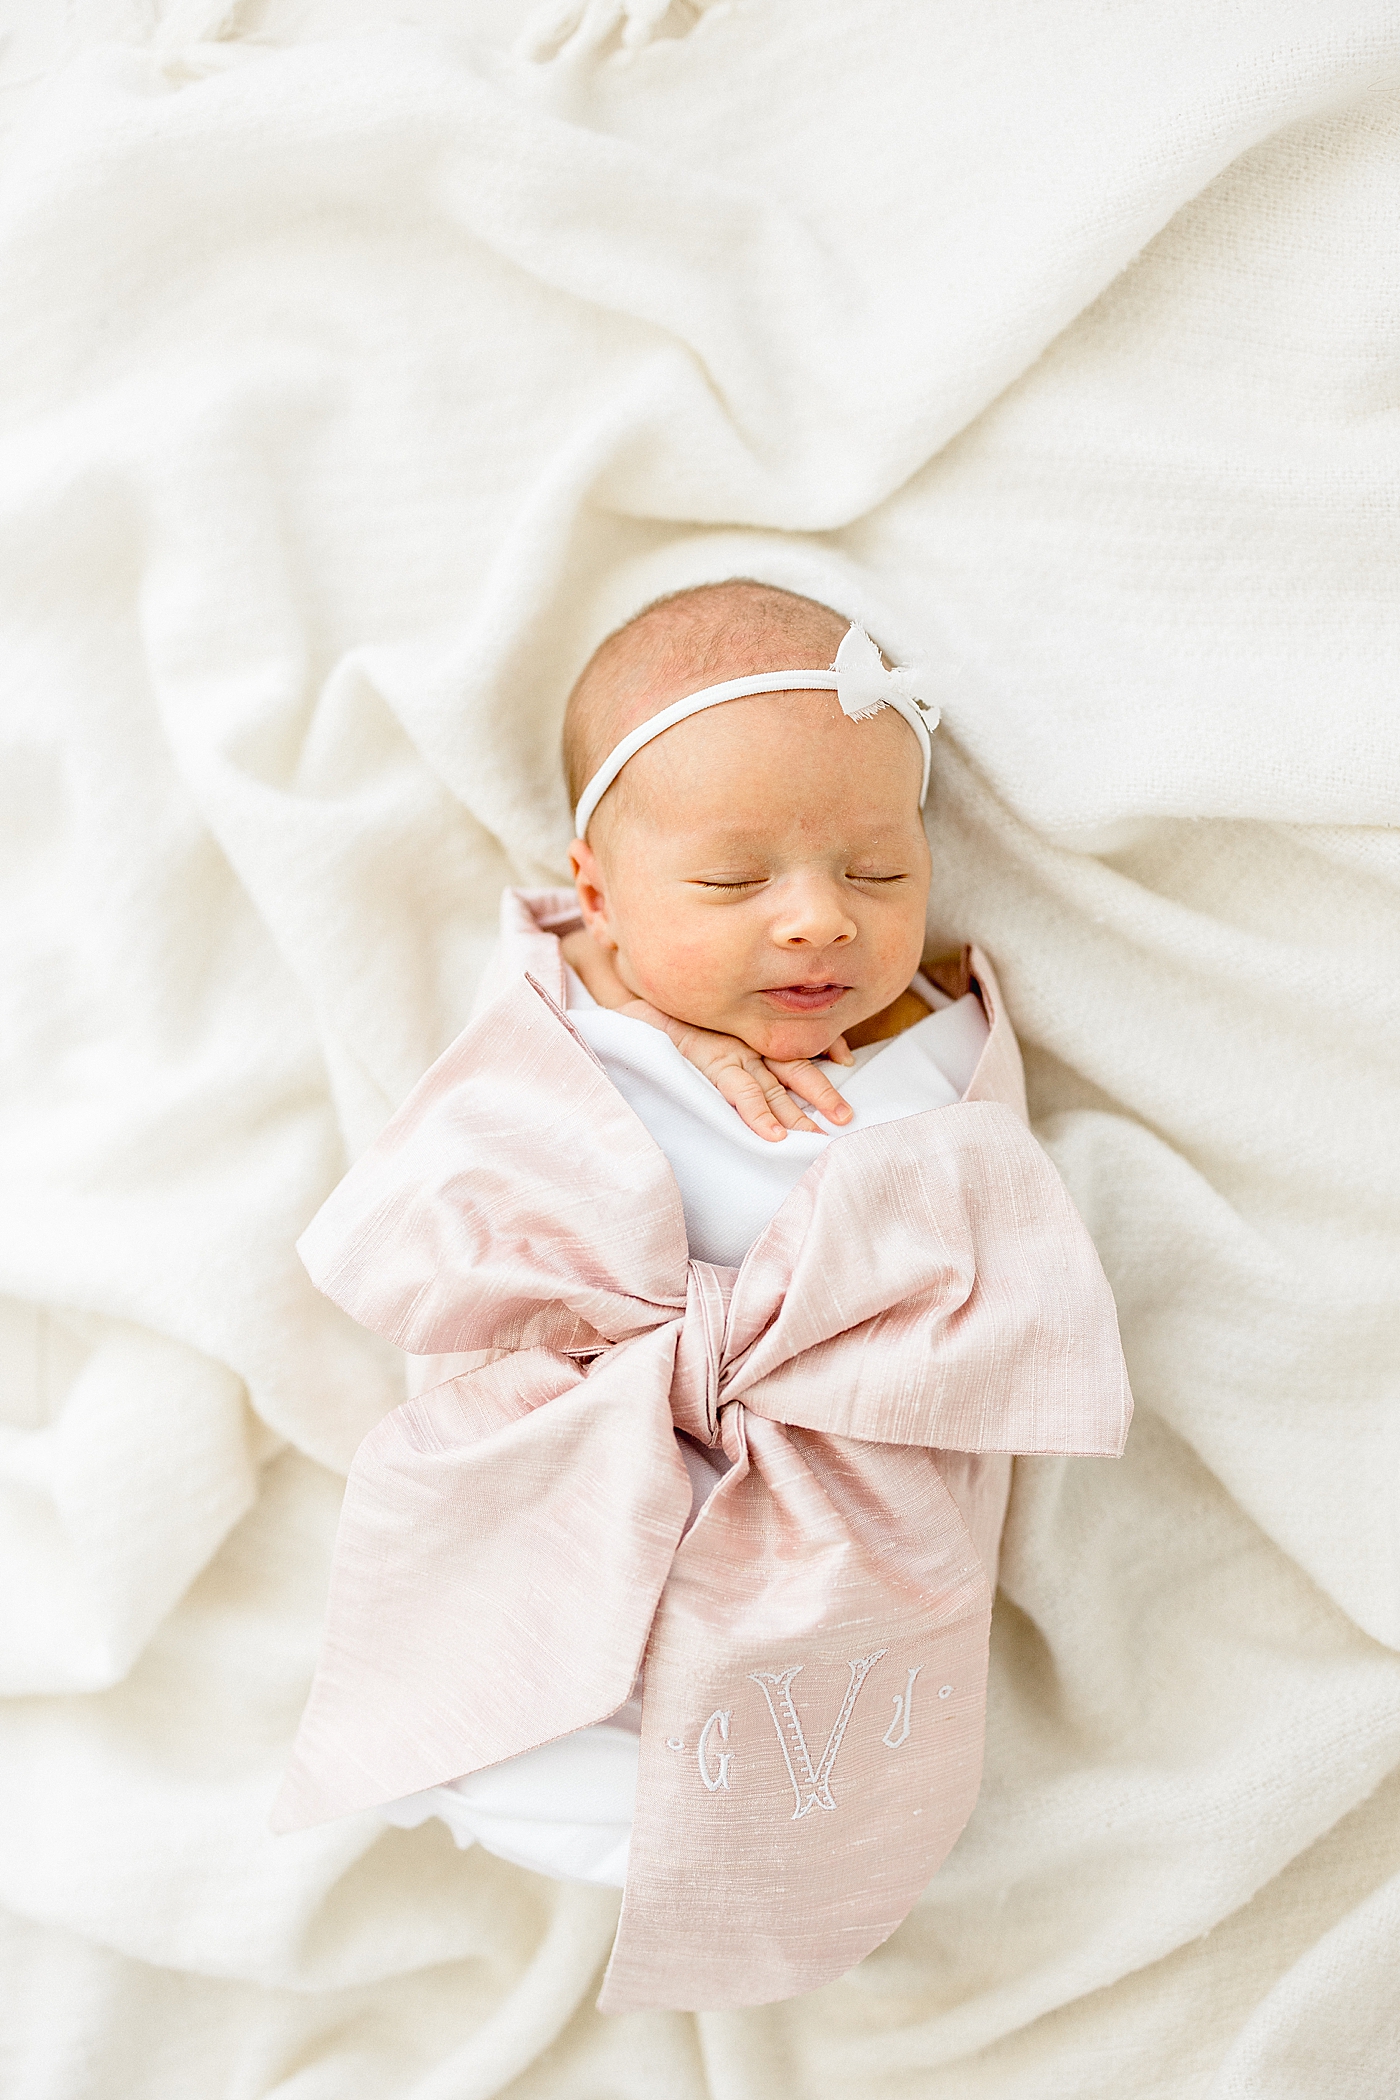 Baby Girl's Studio Newborn Session | Photo by Brittany Elise Photography.